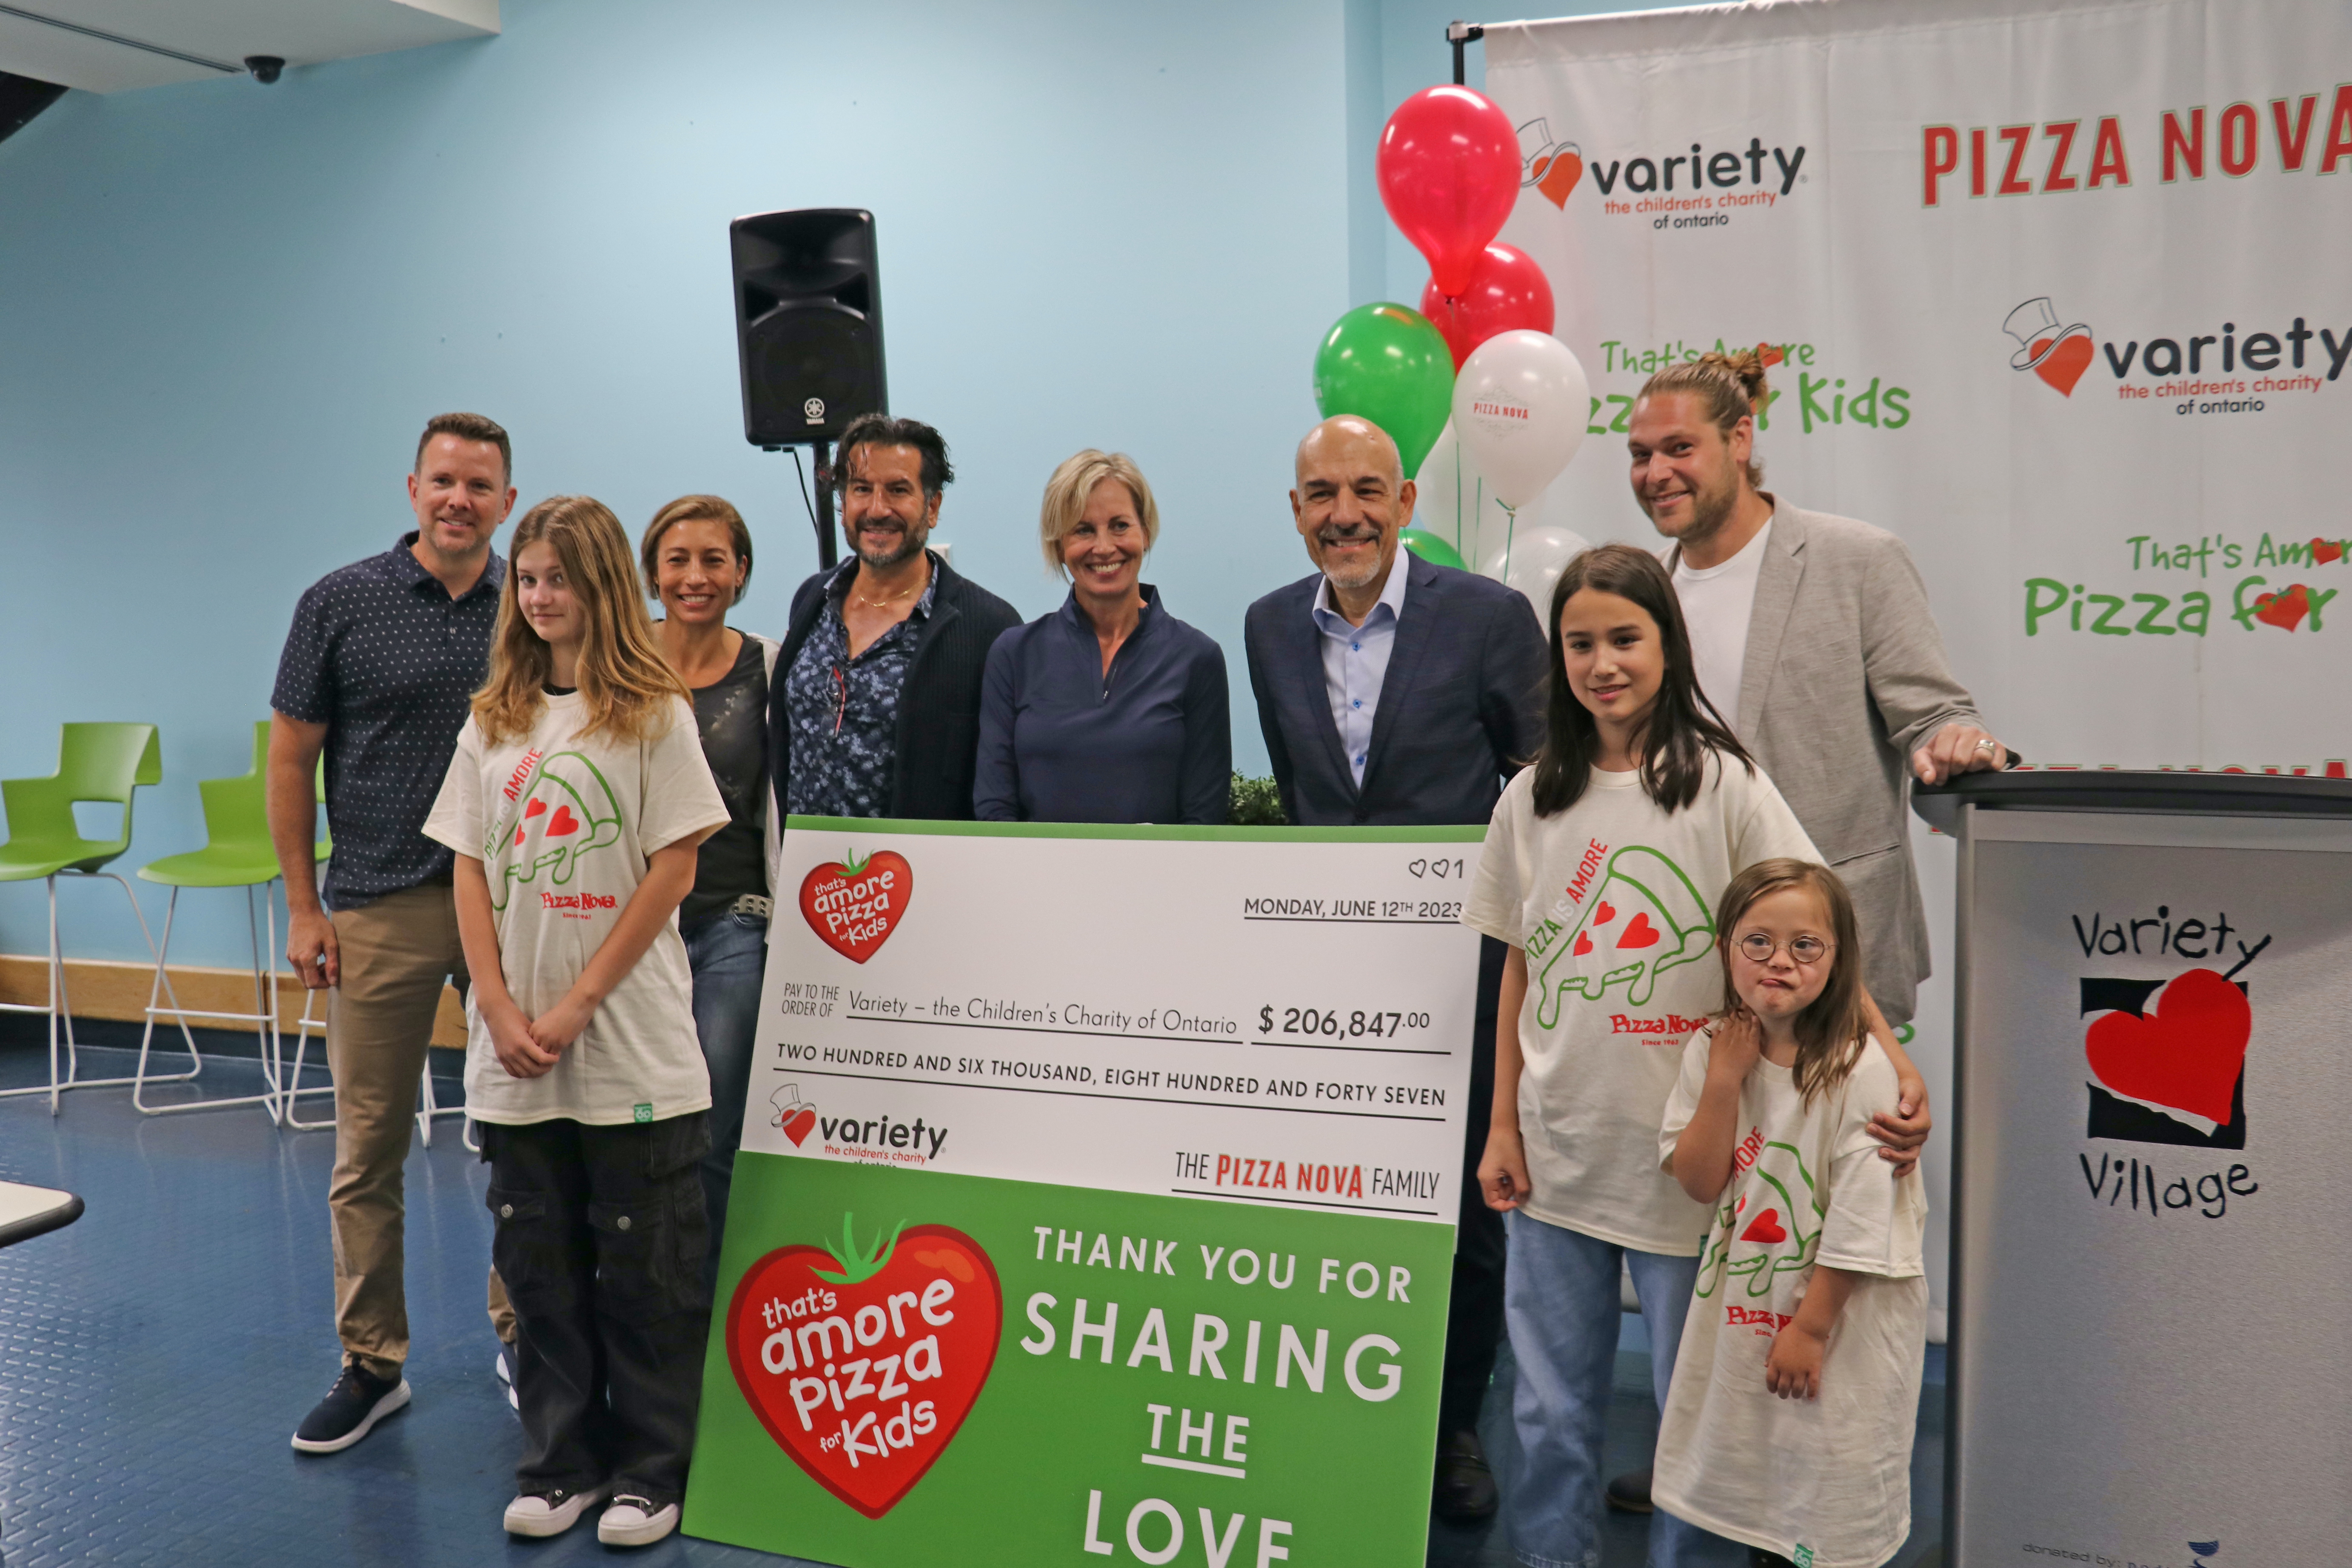 Domenic Primucci, president of Pizza Nova, presents a cheque for $206,847 to Karen Stintz, CEO of Variety The Children’s Charity of Ontario, at Variety Village, June 12, as a result of the 2023 “That’s Amore Pizza for Kids” fundraiser. 